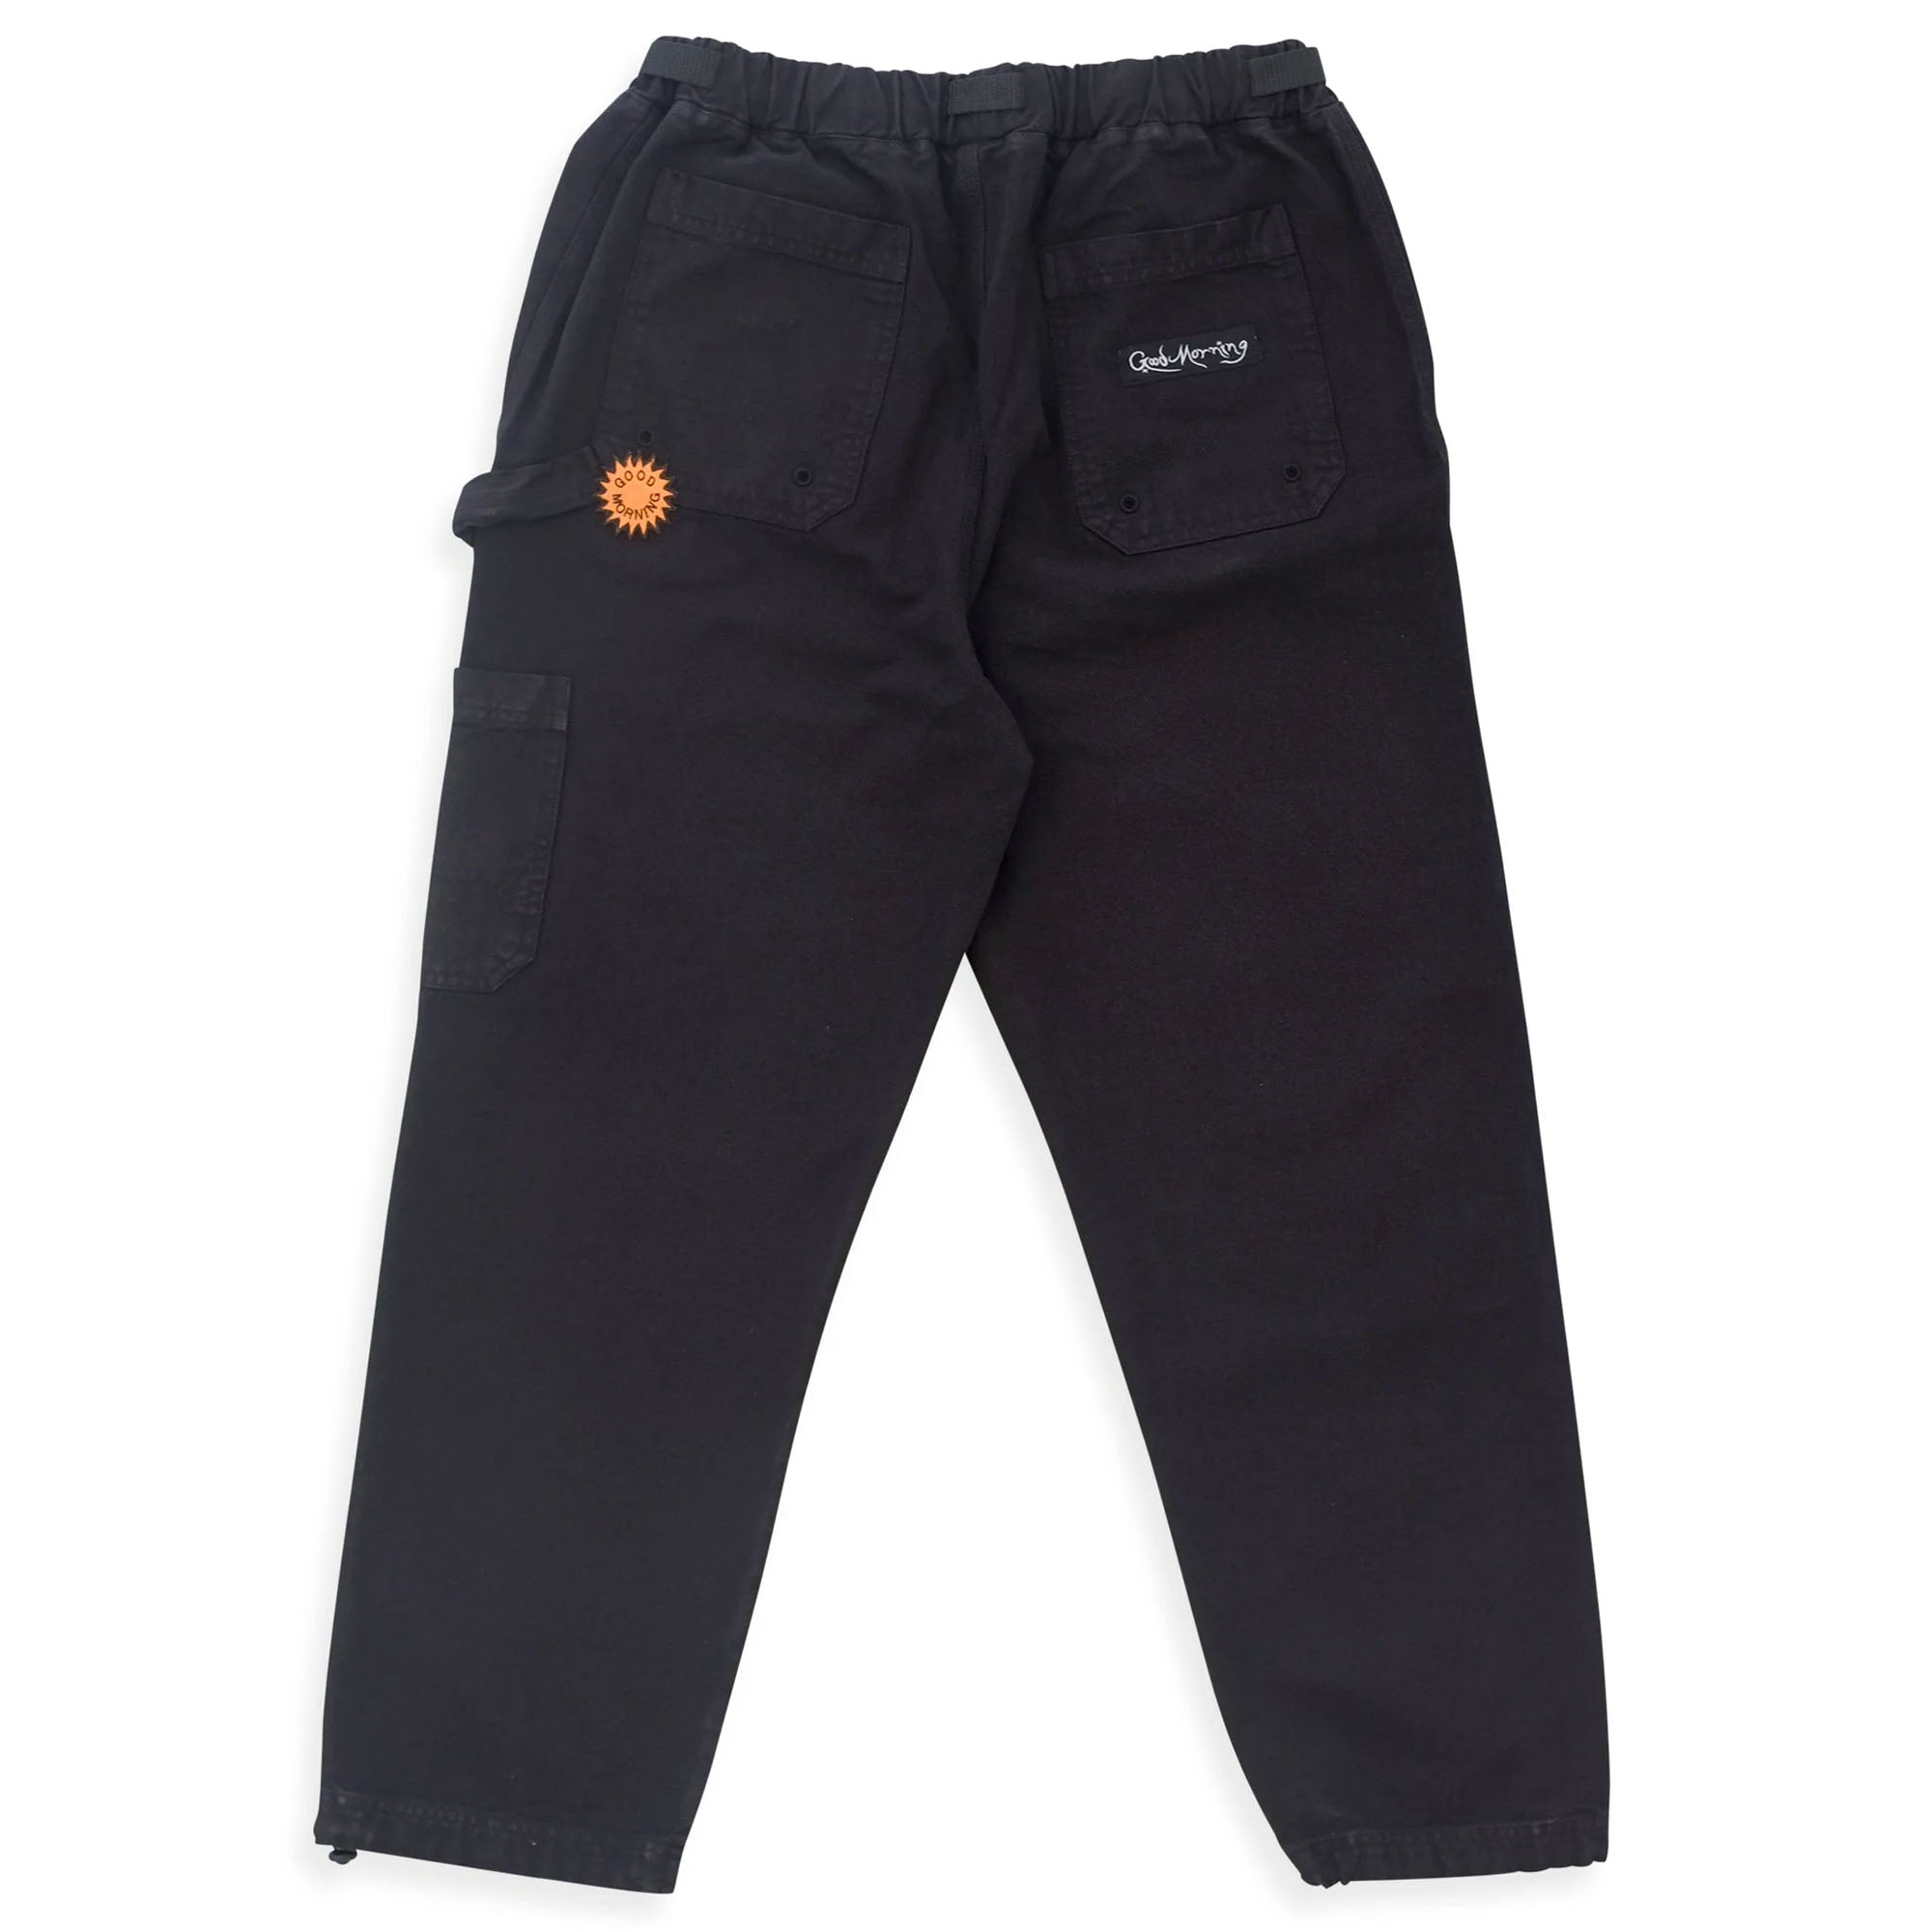 Good Morning Tapes Workers Pant Black